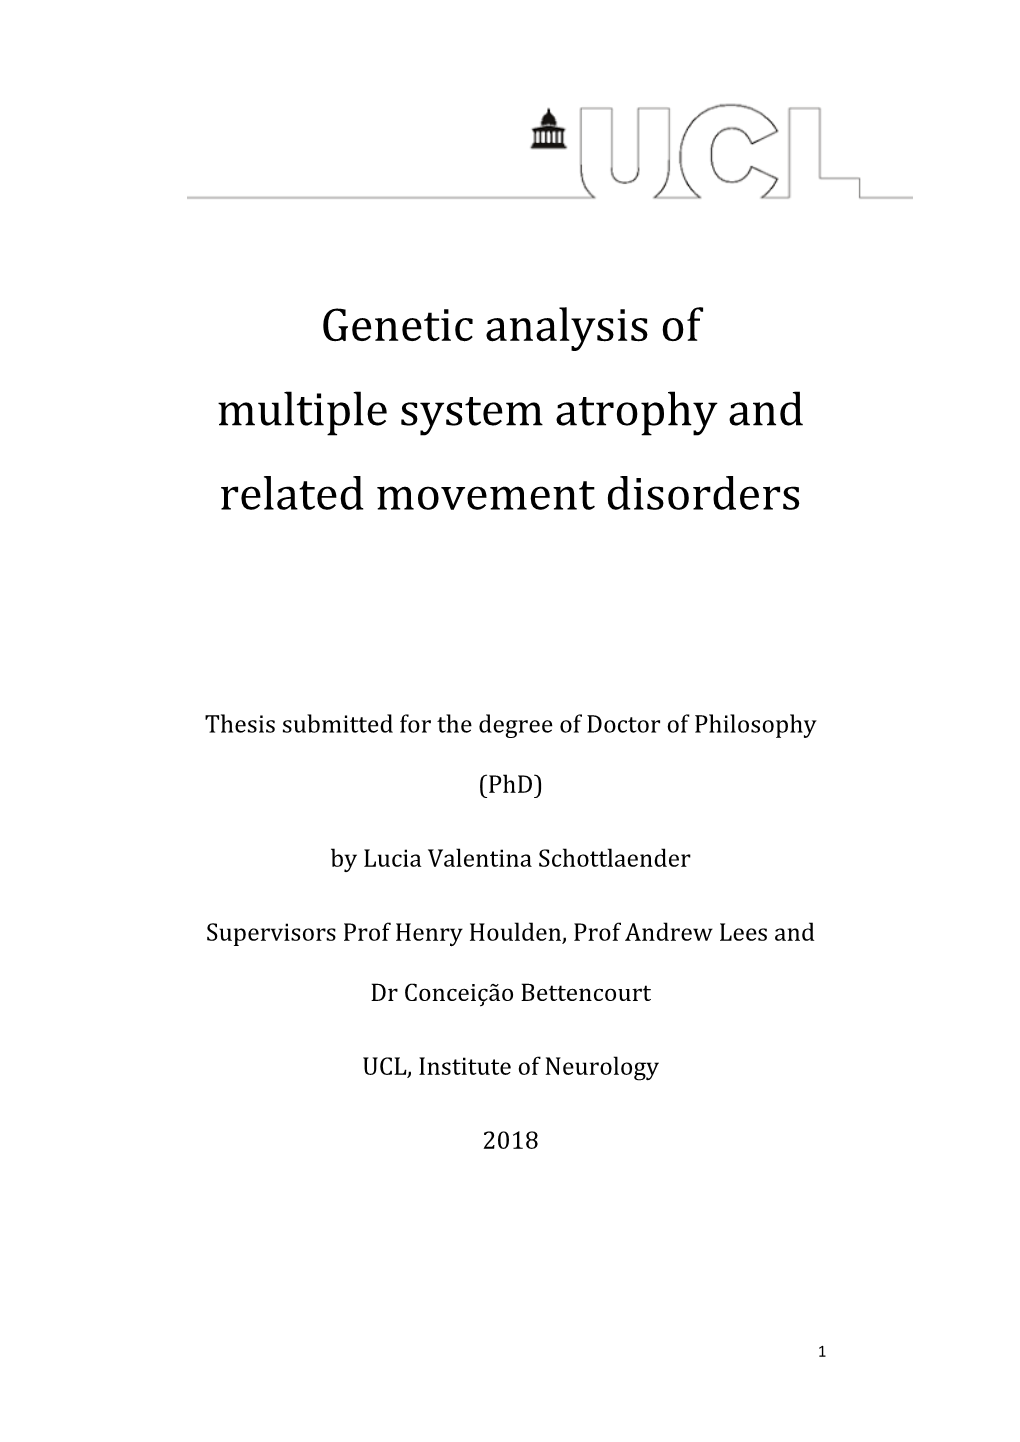 Genetic Analysis of Multiple System Atrophy and Related Movement Disorders